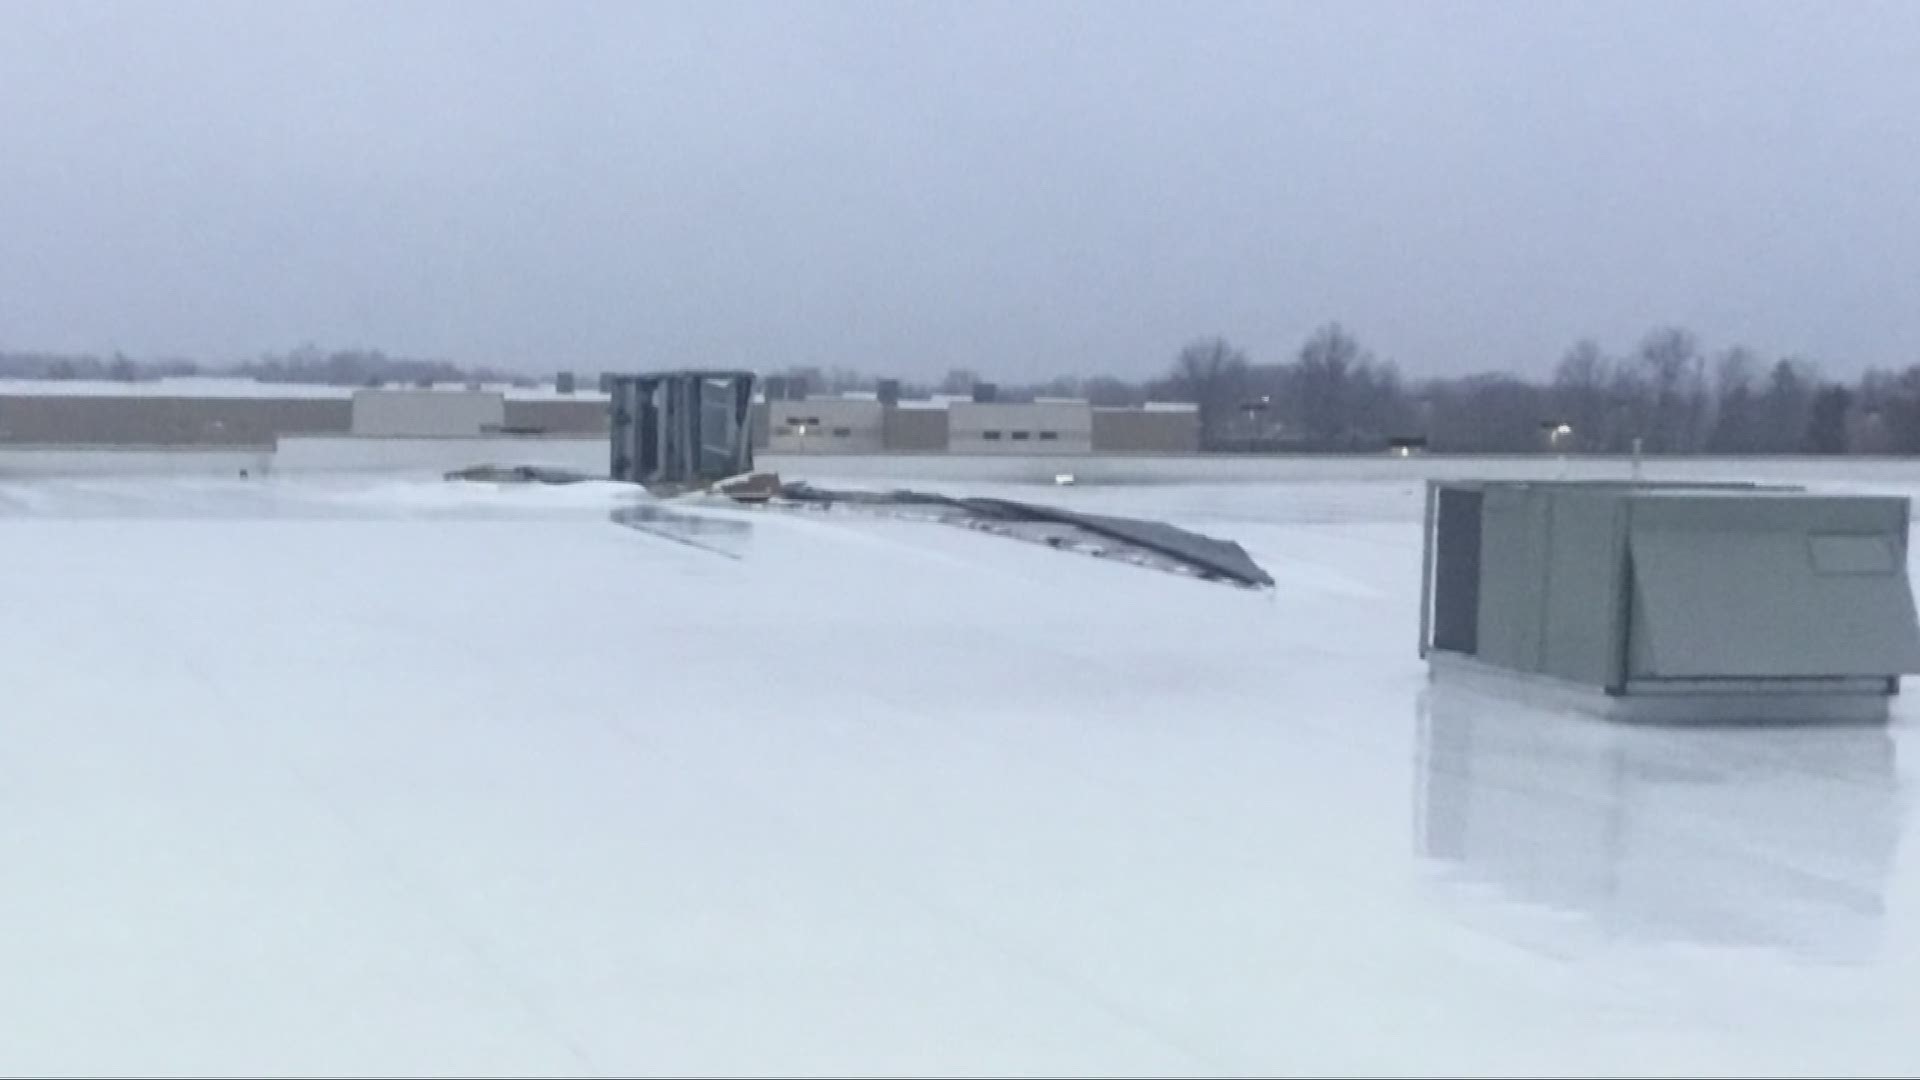 April 15, 2018: As Sunday's strong storms ripped through Northeast Ohio, damage was also reported at the Amazon fulfillment center in Twinsburg. Winds tore off a 50 x 100 foot hole in the building's roof.